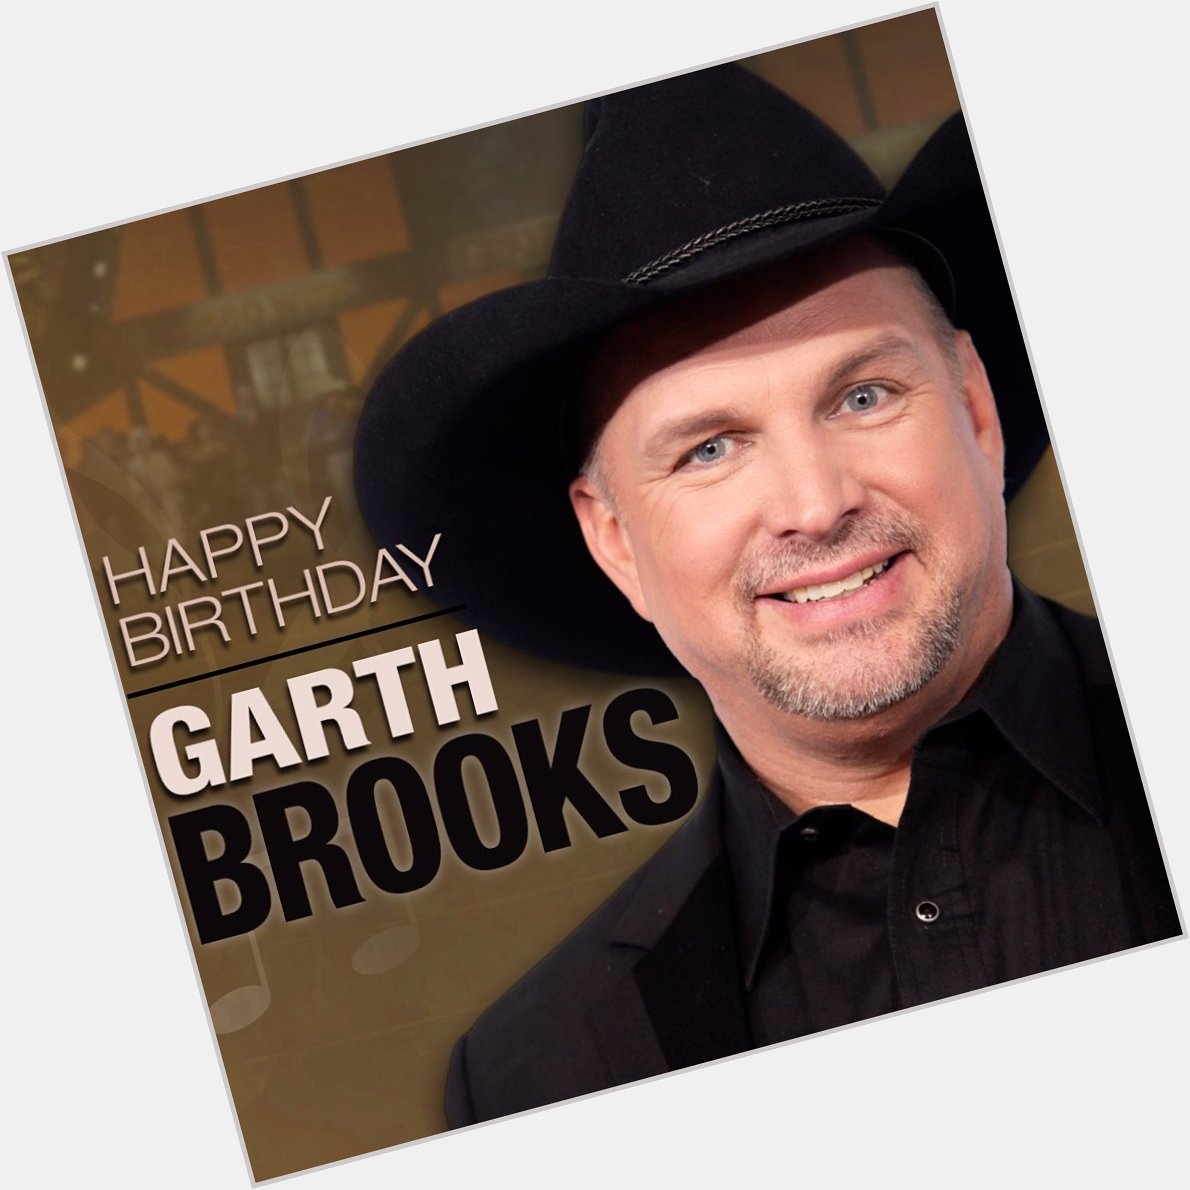 \"Stand straight, walk proud, have a little faith.\"  Happy birthday to Garth Brooks, who turns 58 today! 